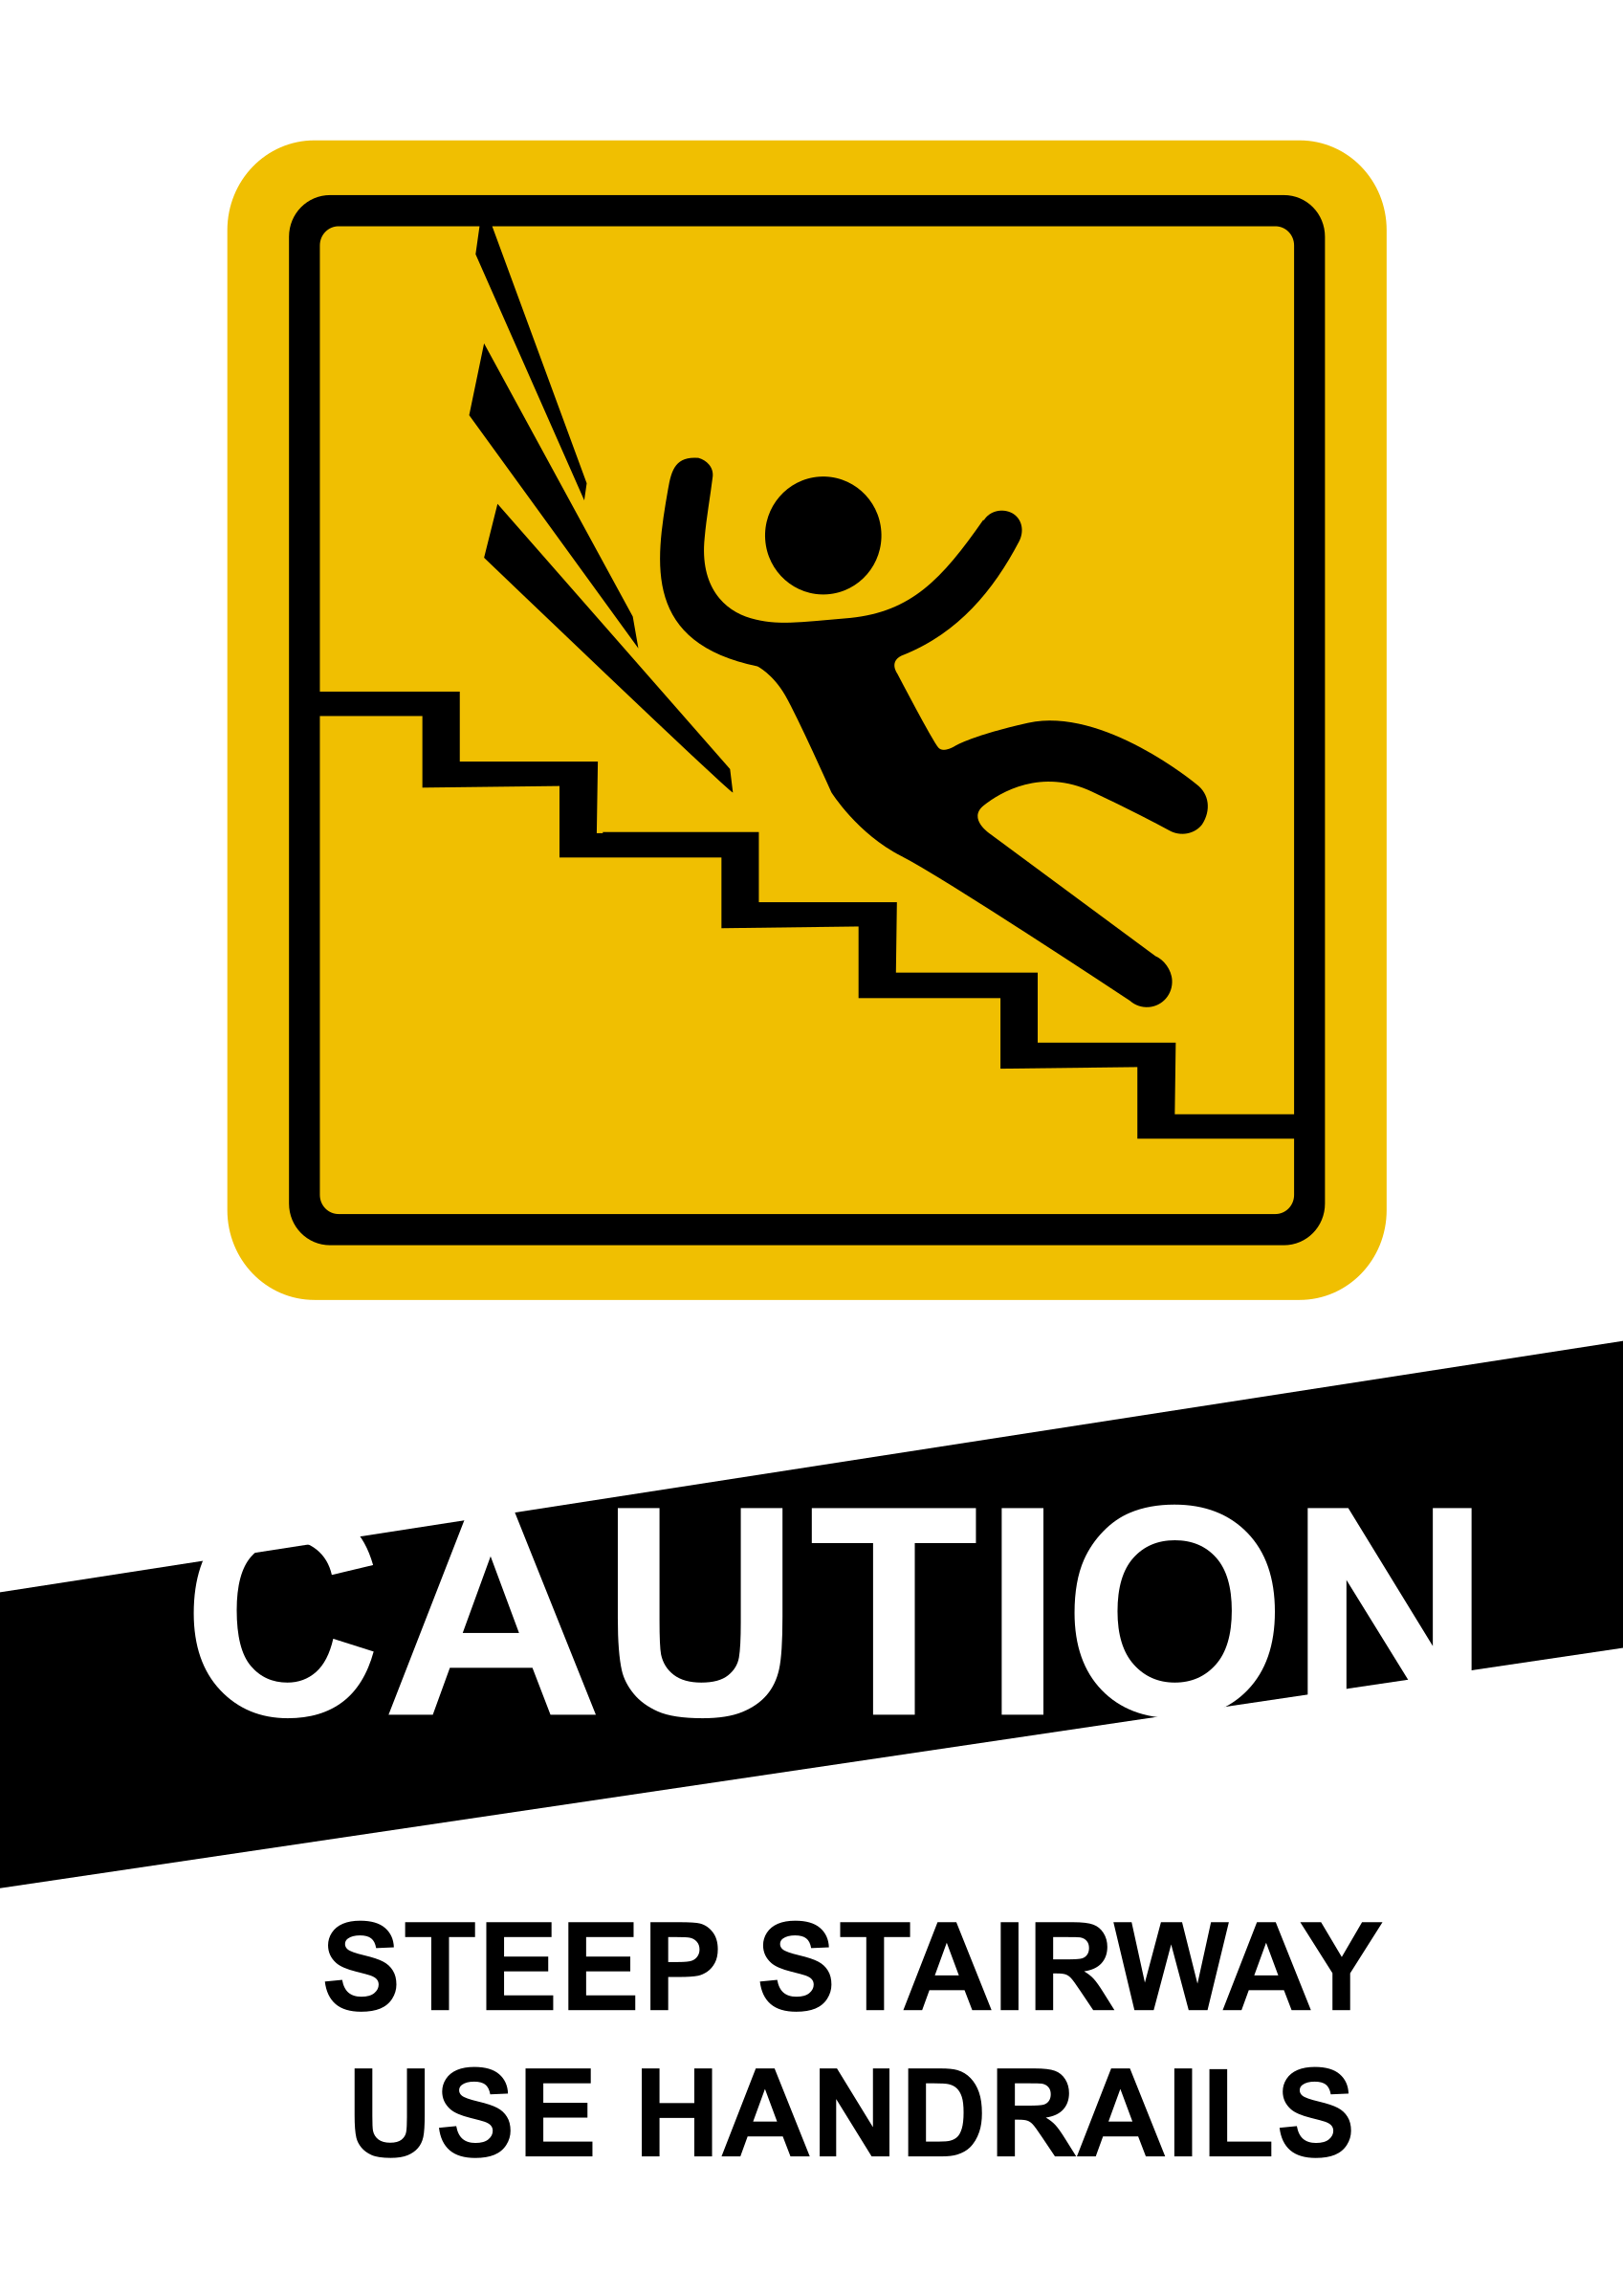 Caution stairs big image. Hill clipart steep hill